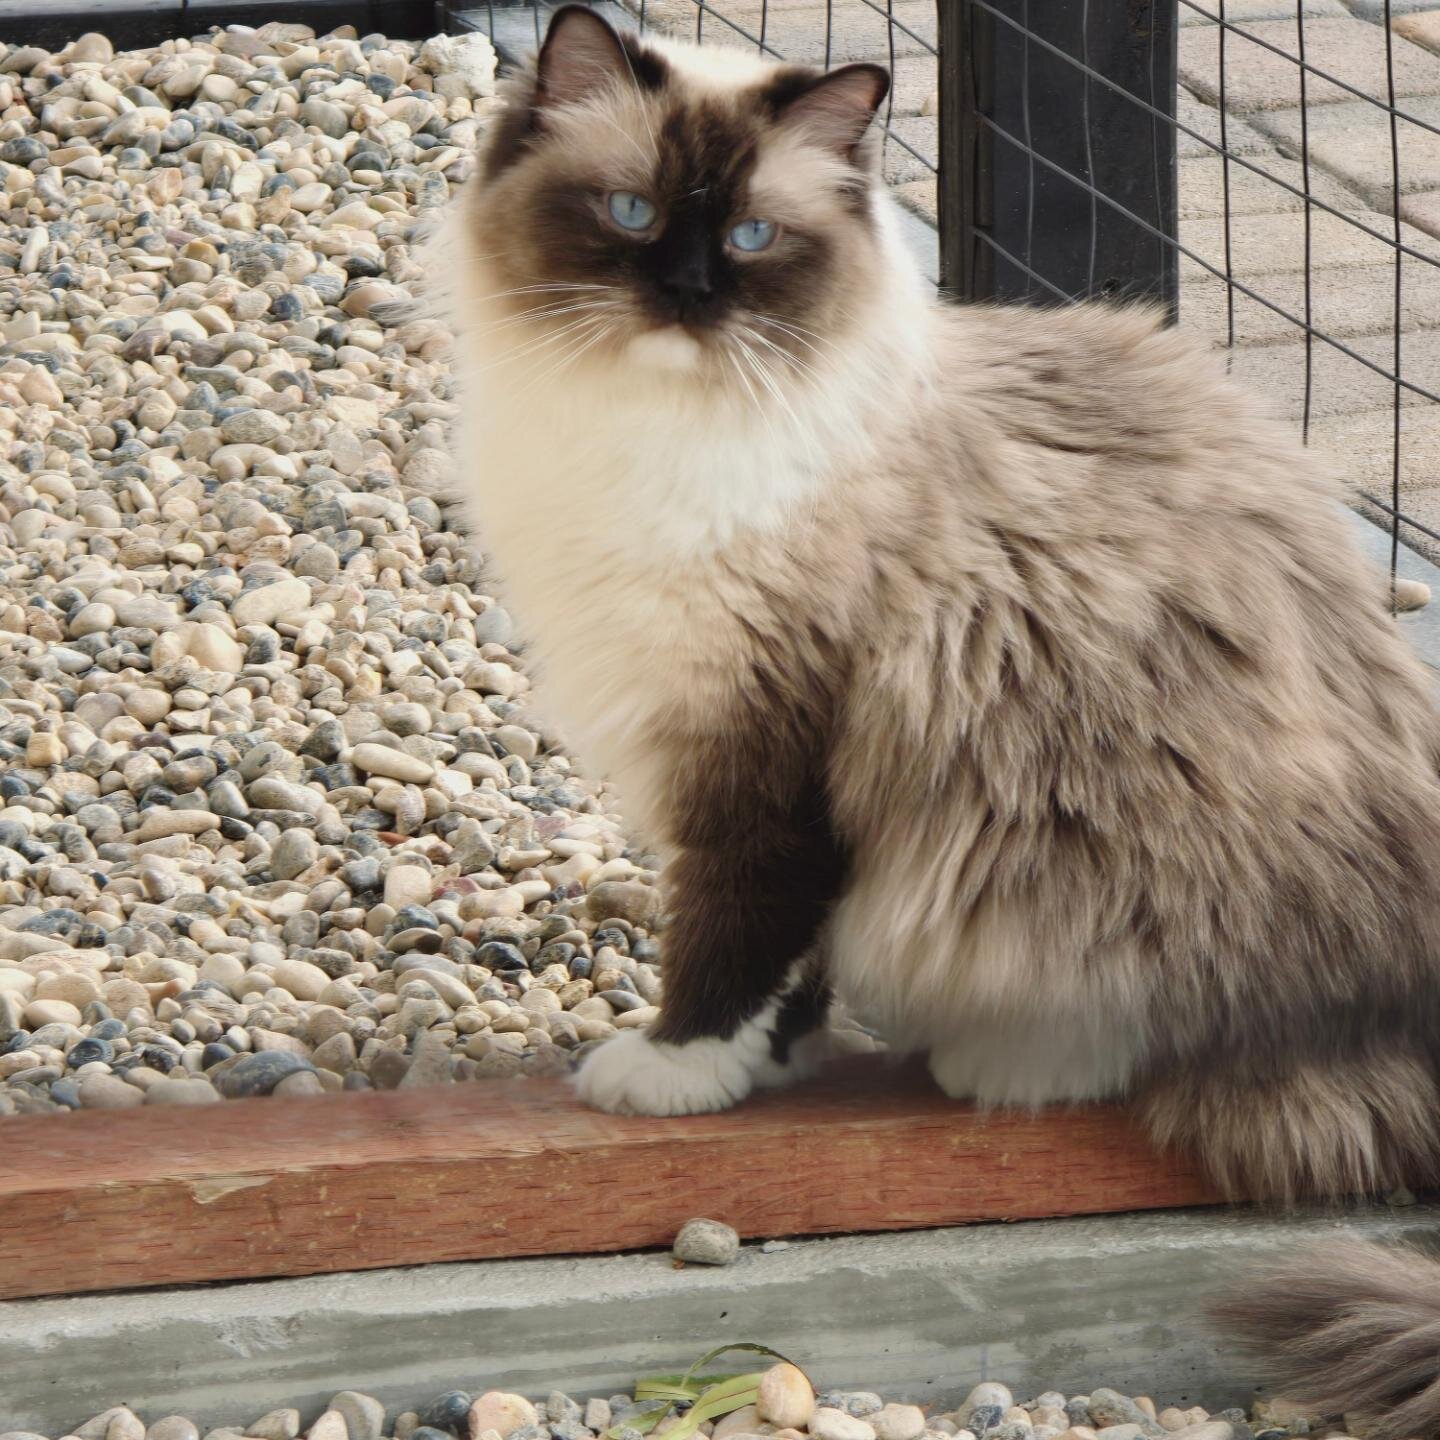 Francesca is exploring the new catio we're building, giving them the freedom to move in and out as they please; can't wait !!! #RagdollCattery#babyragdoll
#LasVegasRagdolls#kittenslasvegas
#RagdollKittensLV#babypetpictures
#PurebredRagdolls#babies
#R